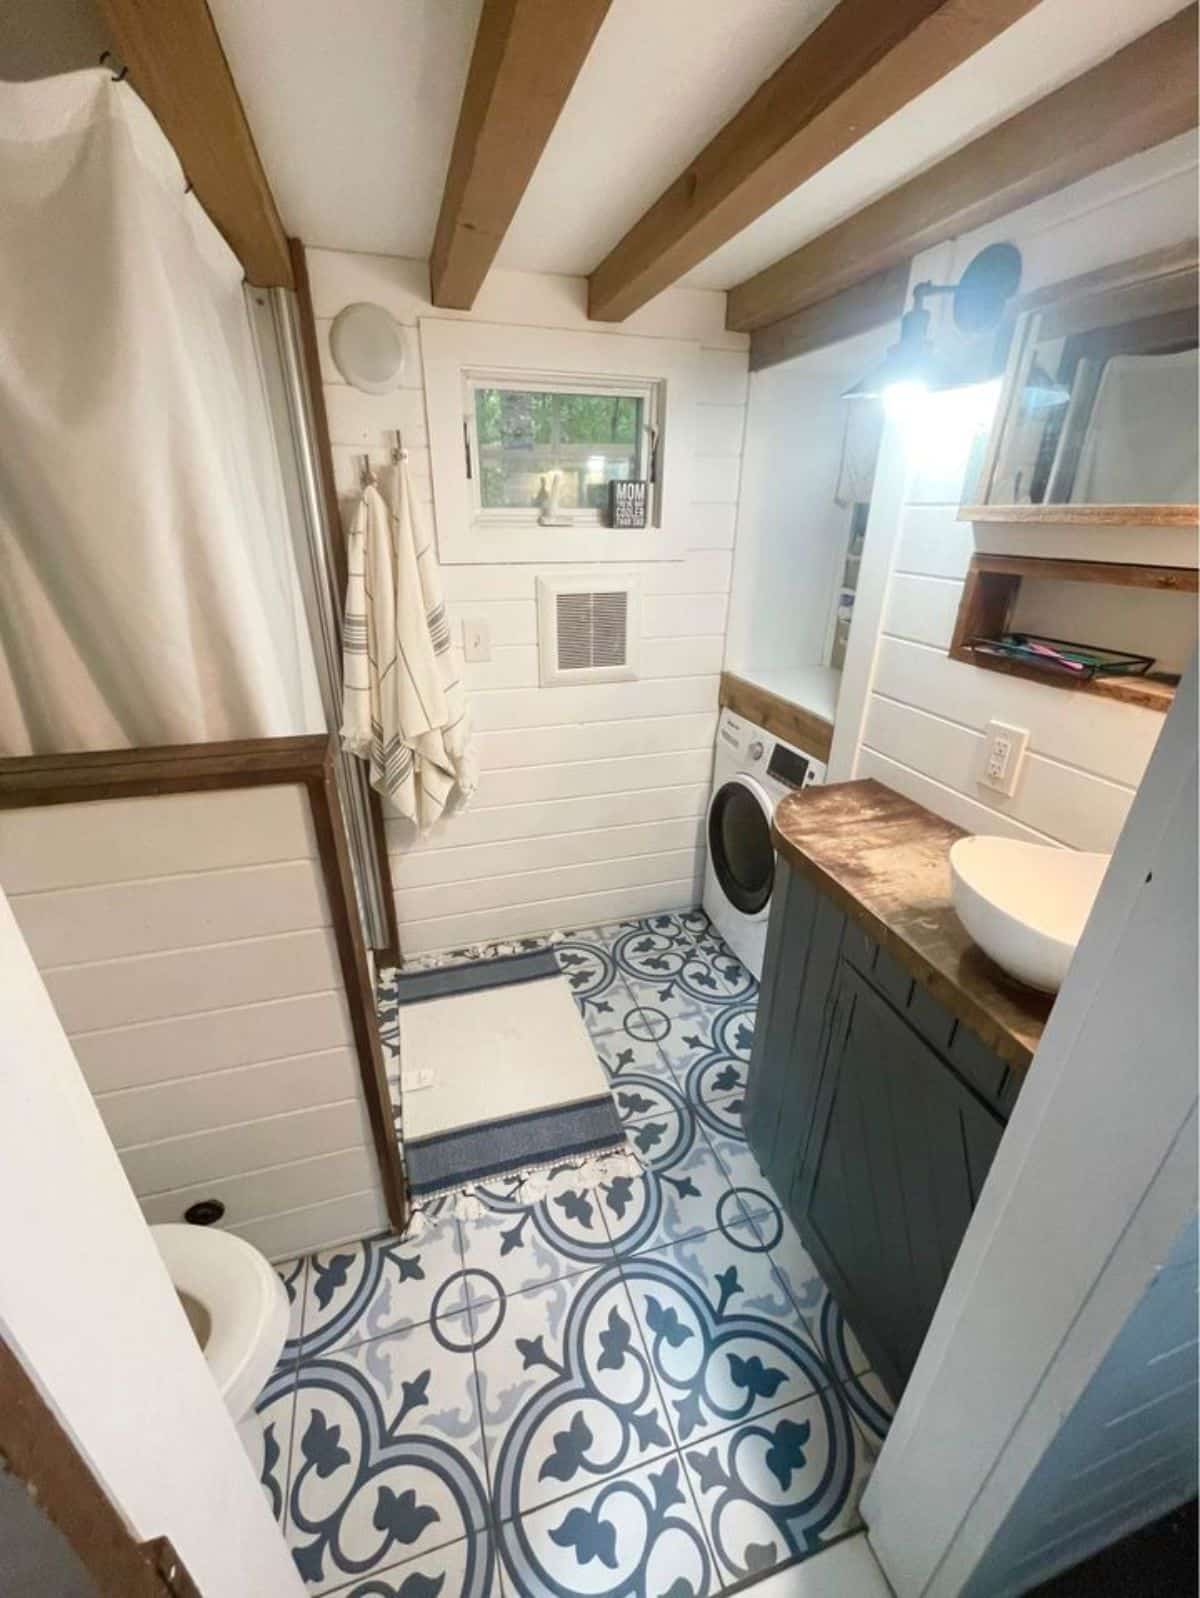 Bathroom area of Stunning 3 Bedroom Tiny House has sink with vanity & mirror, standard toilet, separate shower area, washer dryer combo and lots of storage.